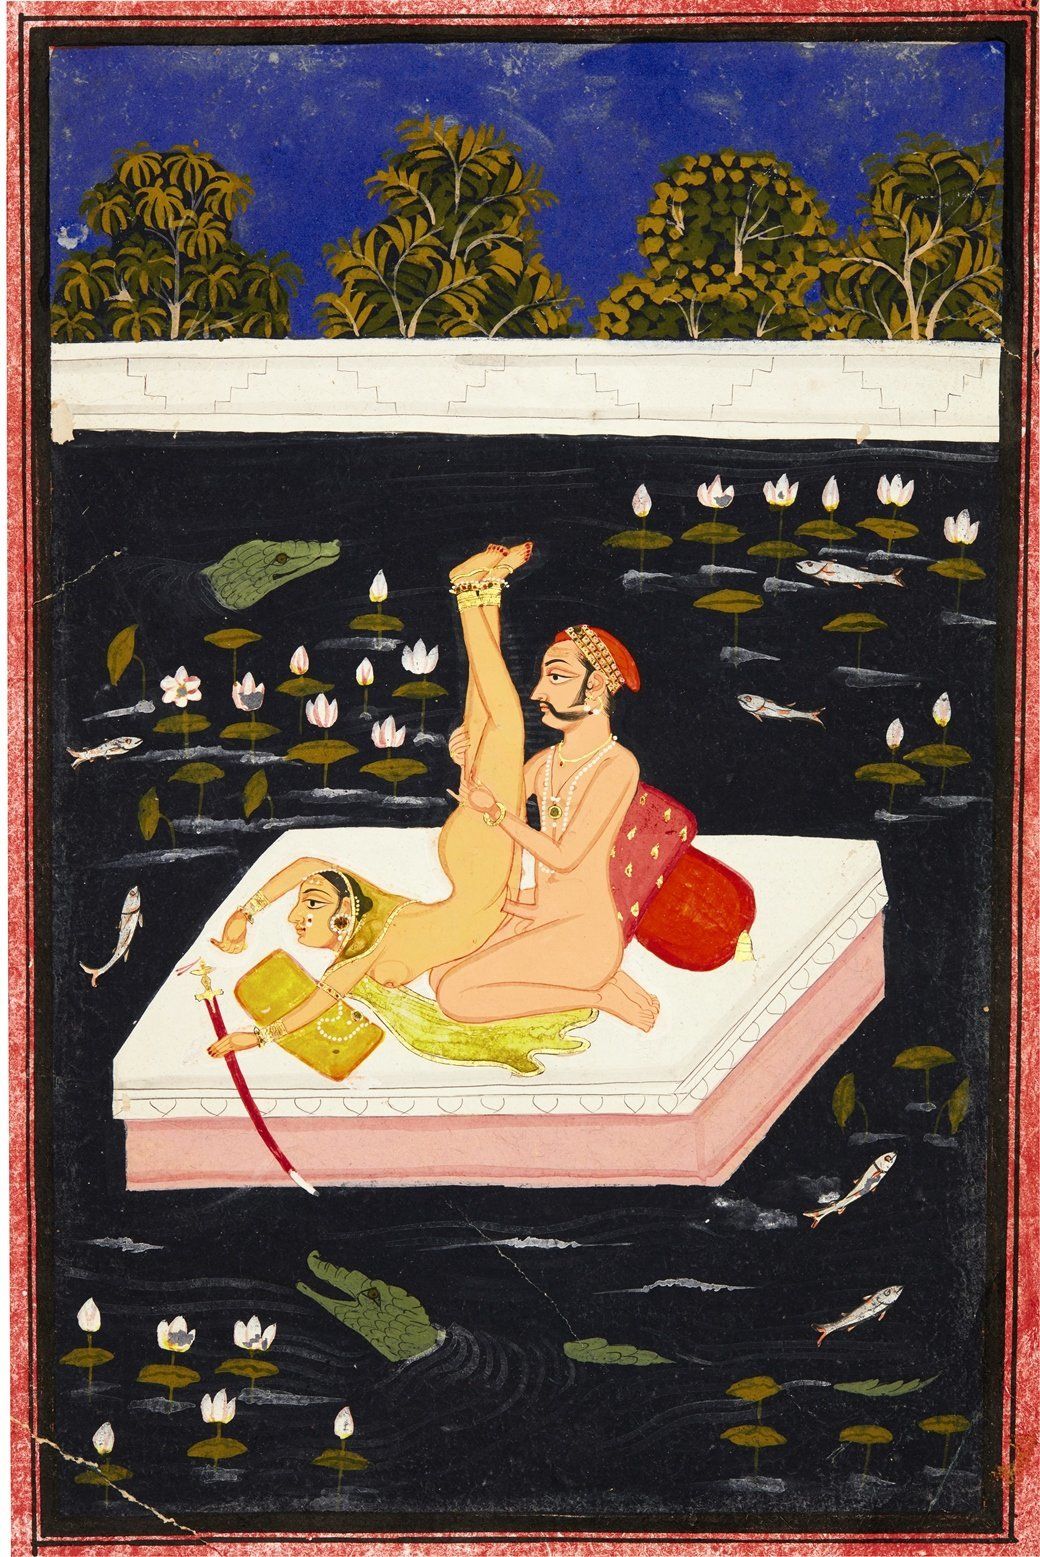 A couple making acrobatic love on a lake, Mewar, North India, 18th century. (Est. £2,000 to £3,000.)